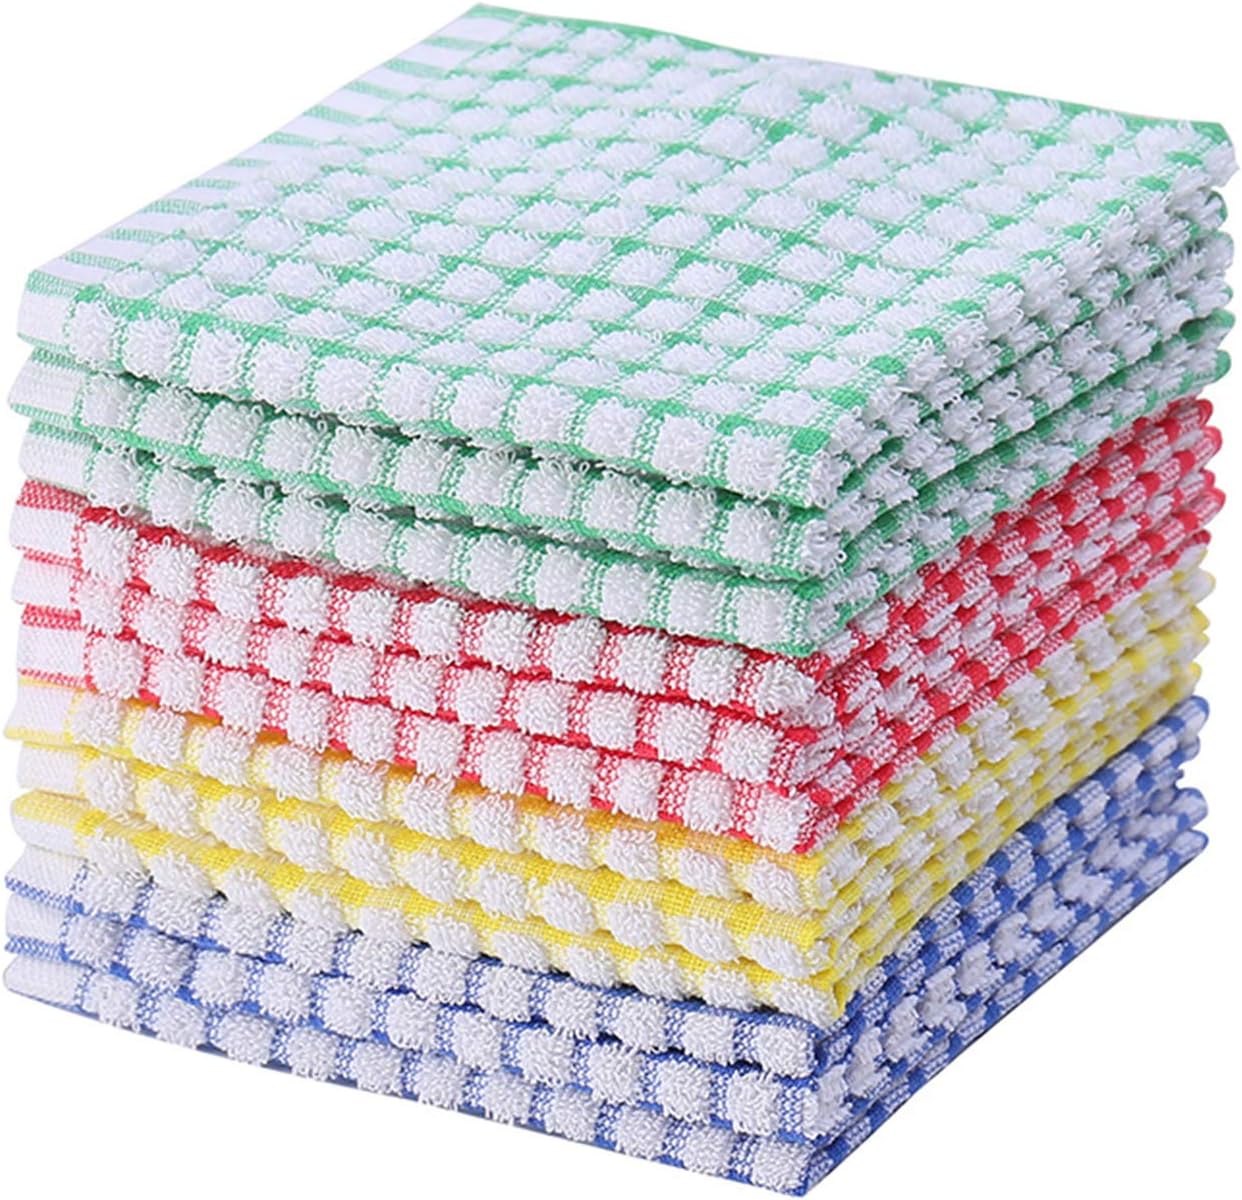 Cosy House Collection 2-Pack Pattern Decorative Kitchen Towel Set - 100% Cotton Dish Cloths for Washing & Drying - 15 inch x 25 inch Soft & Absorbent